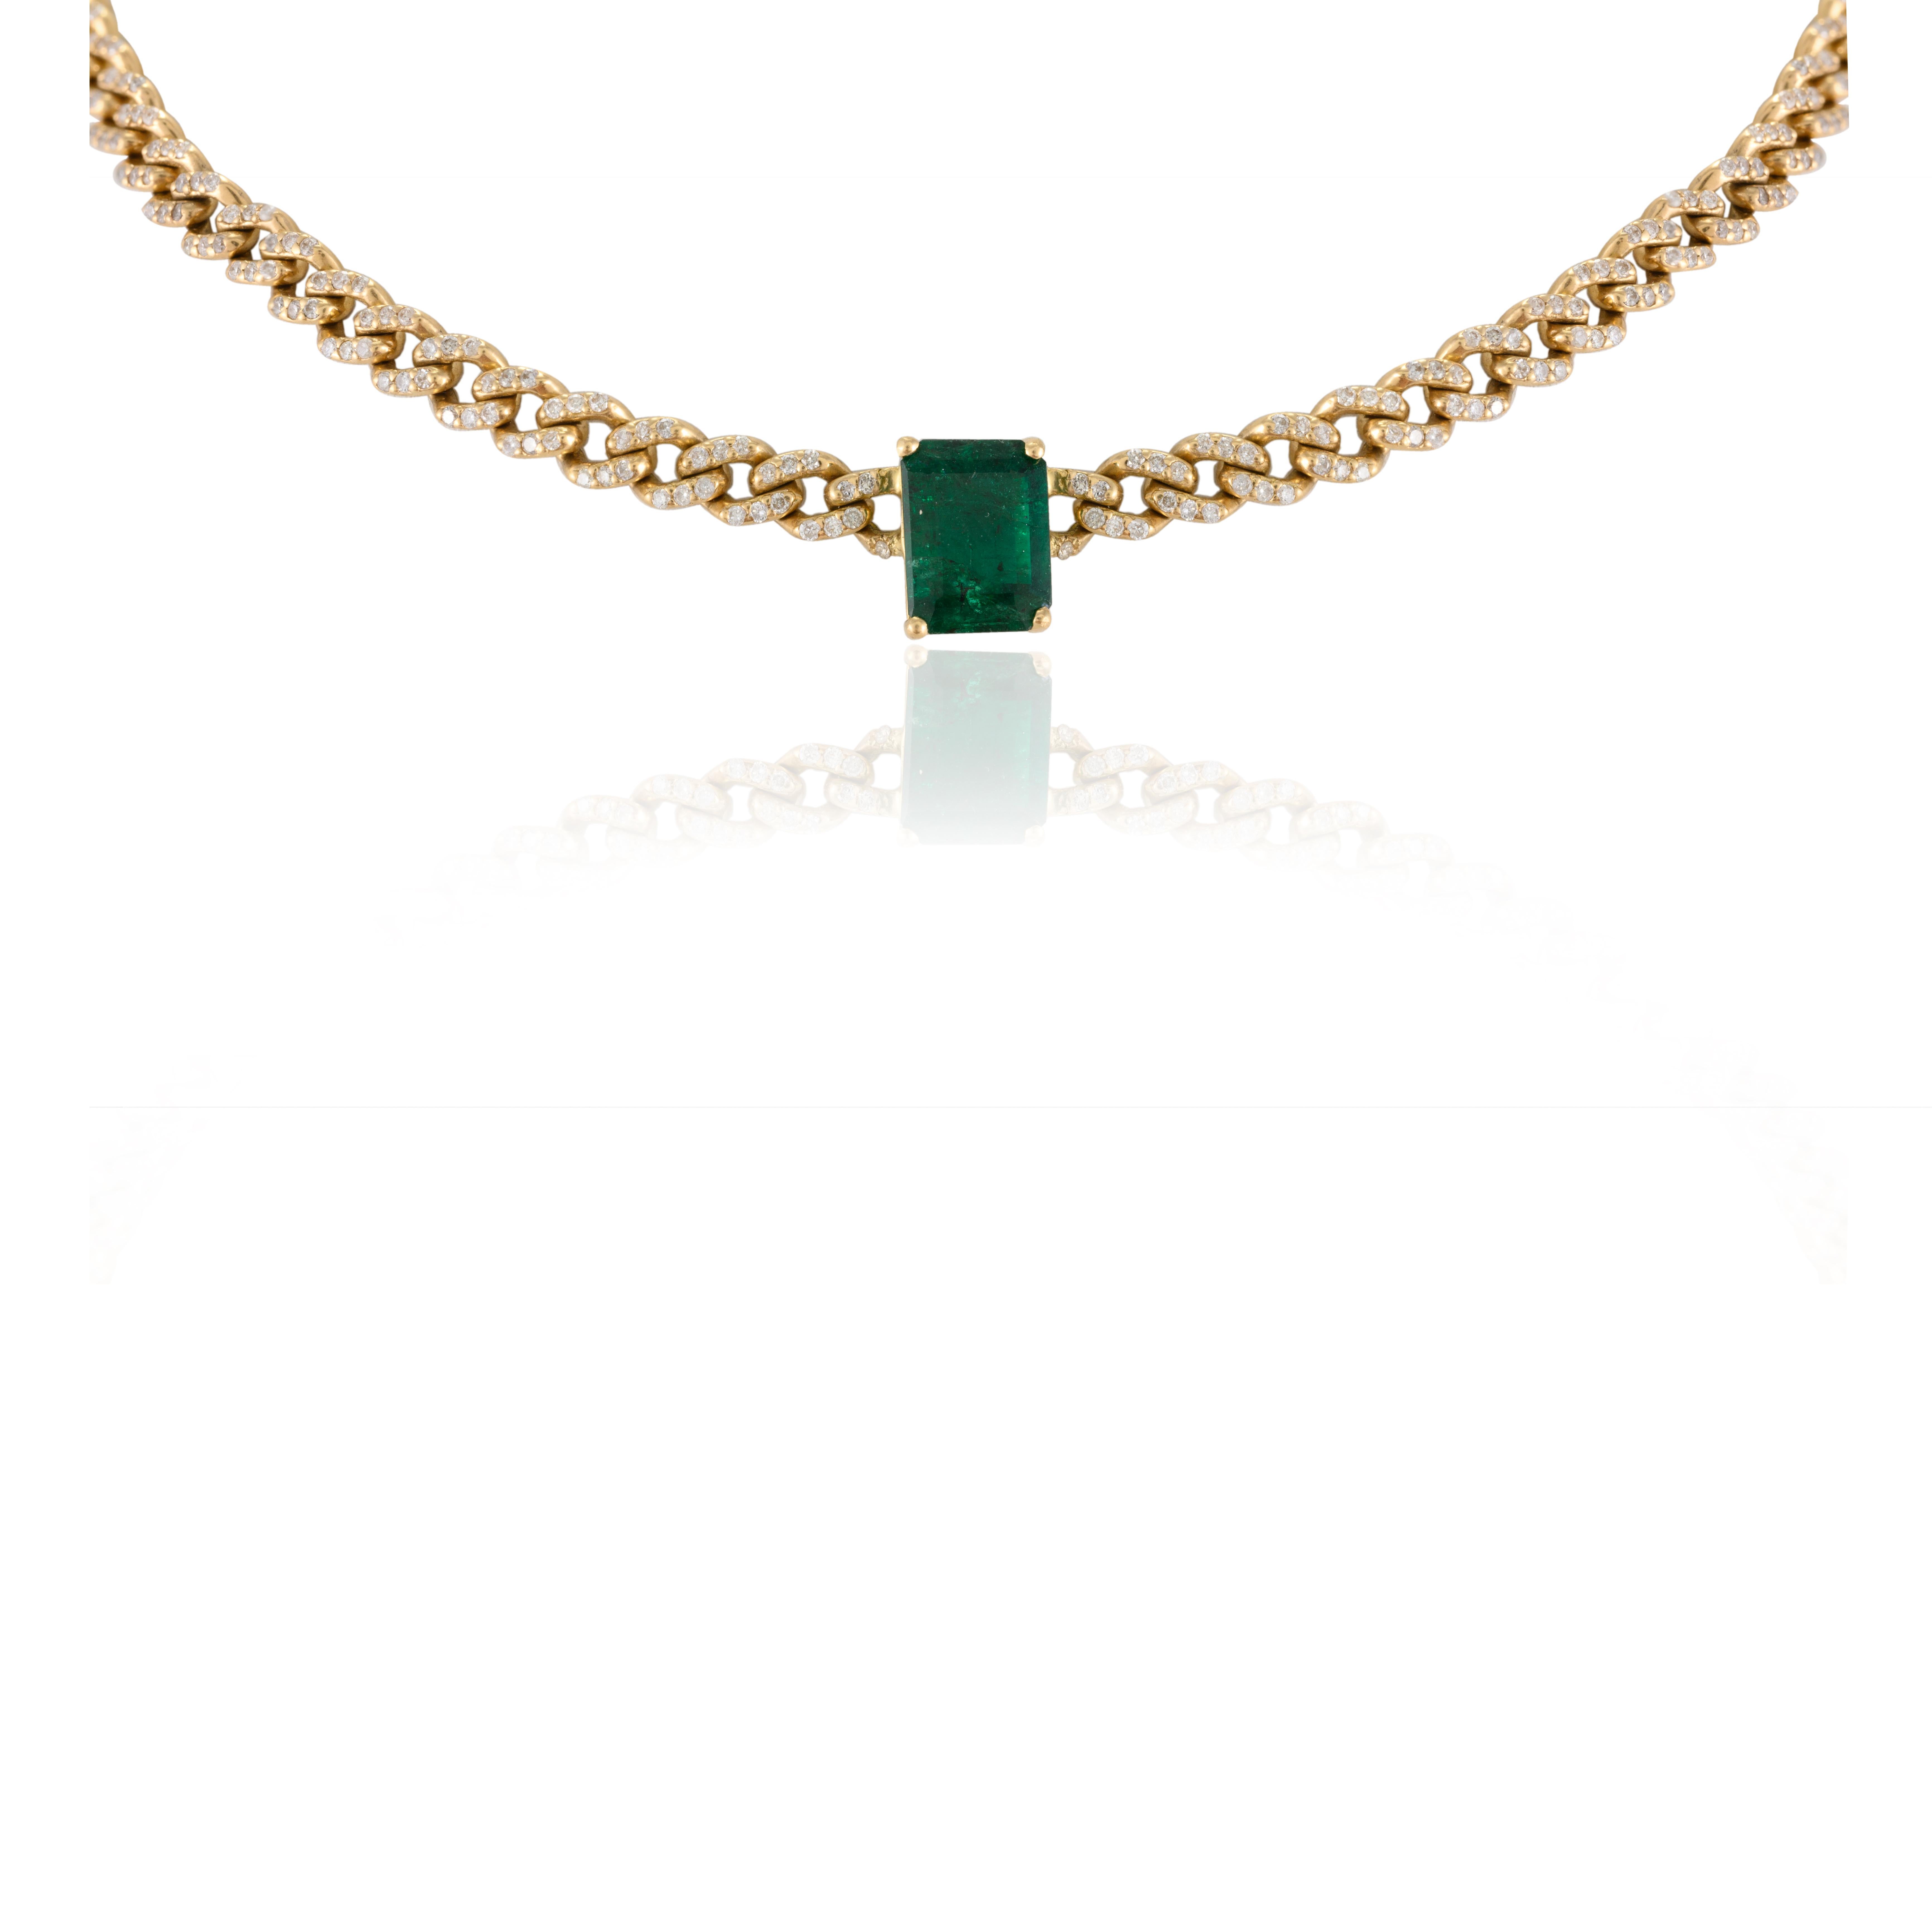 Genuine Deep Green Emerald and Diamond Curb Chain Choker Necklace in 18K Gold studded with octagon cut emeralds and diamonds studded on chain. This stunning piece of jewelry instantly elevates a casual look or dressy outfit. 
Emerald enhances